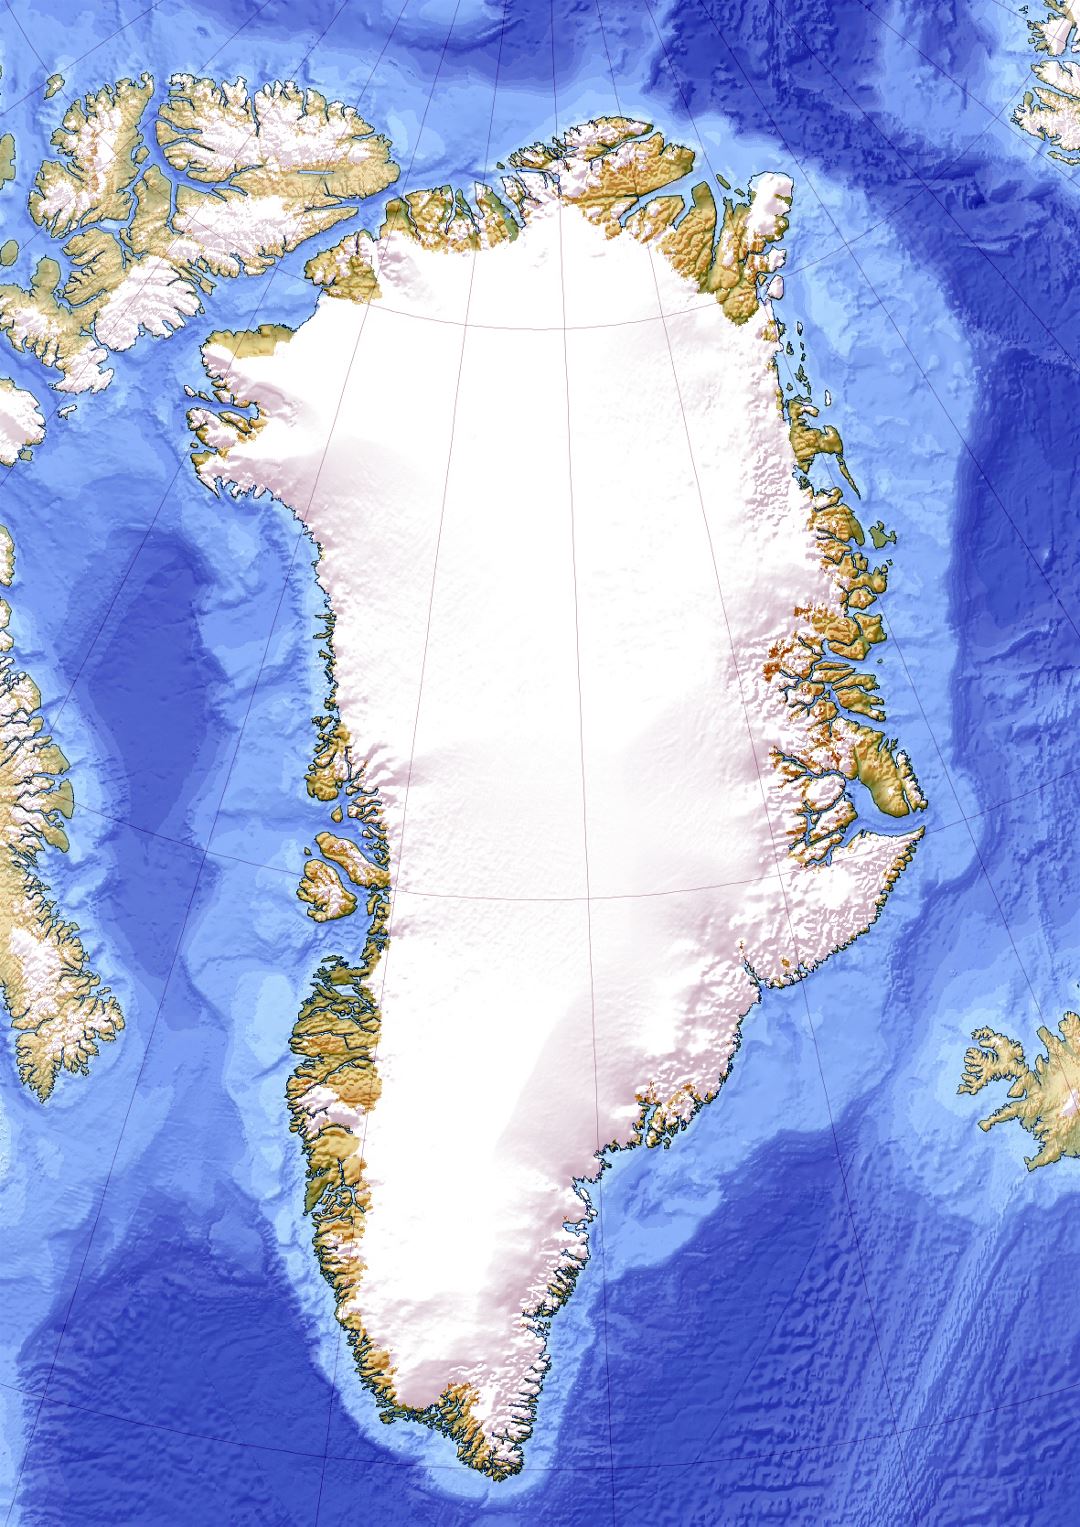 Large relief map of Greenland